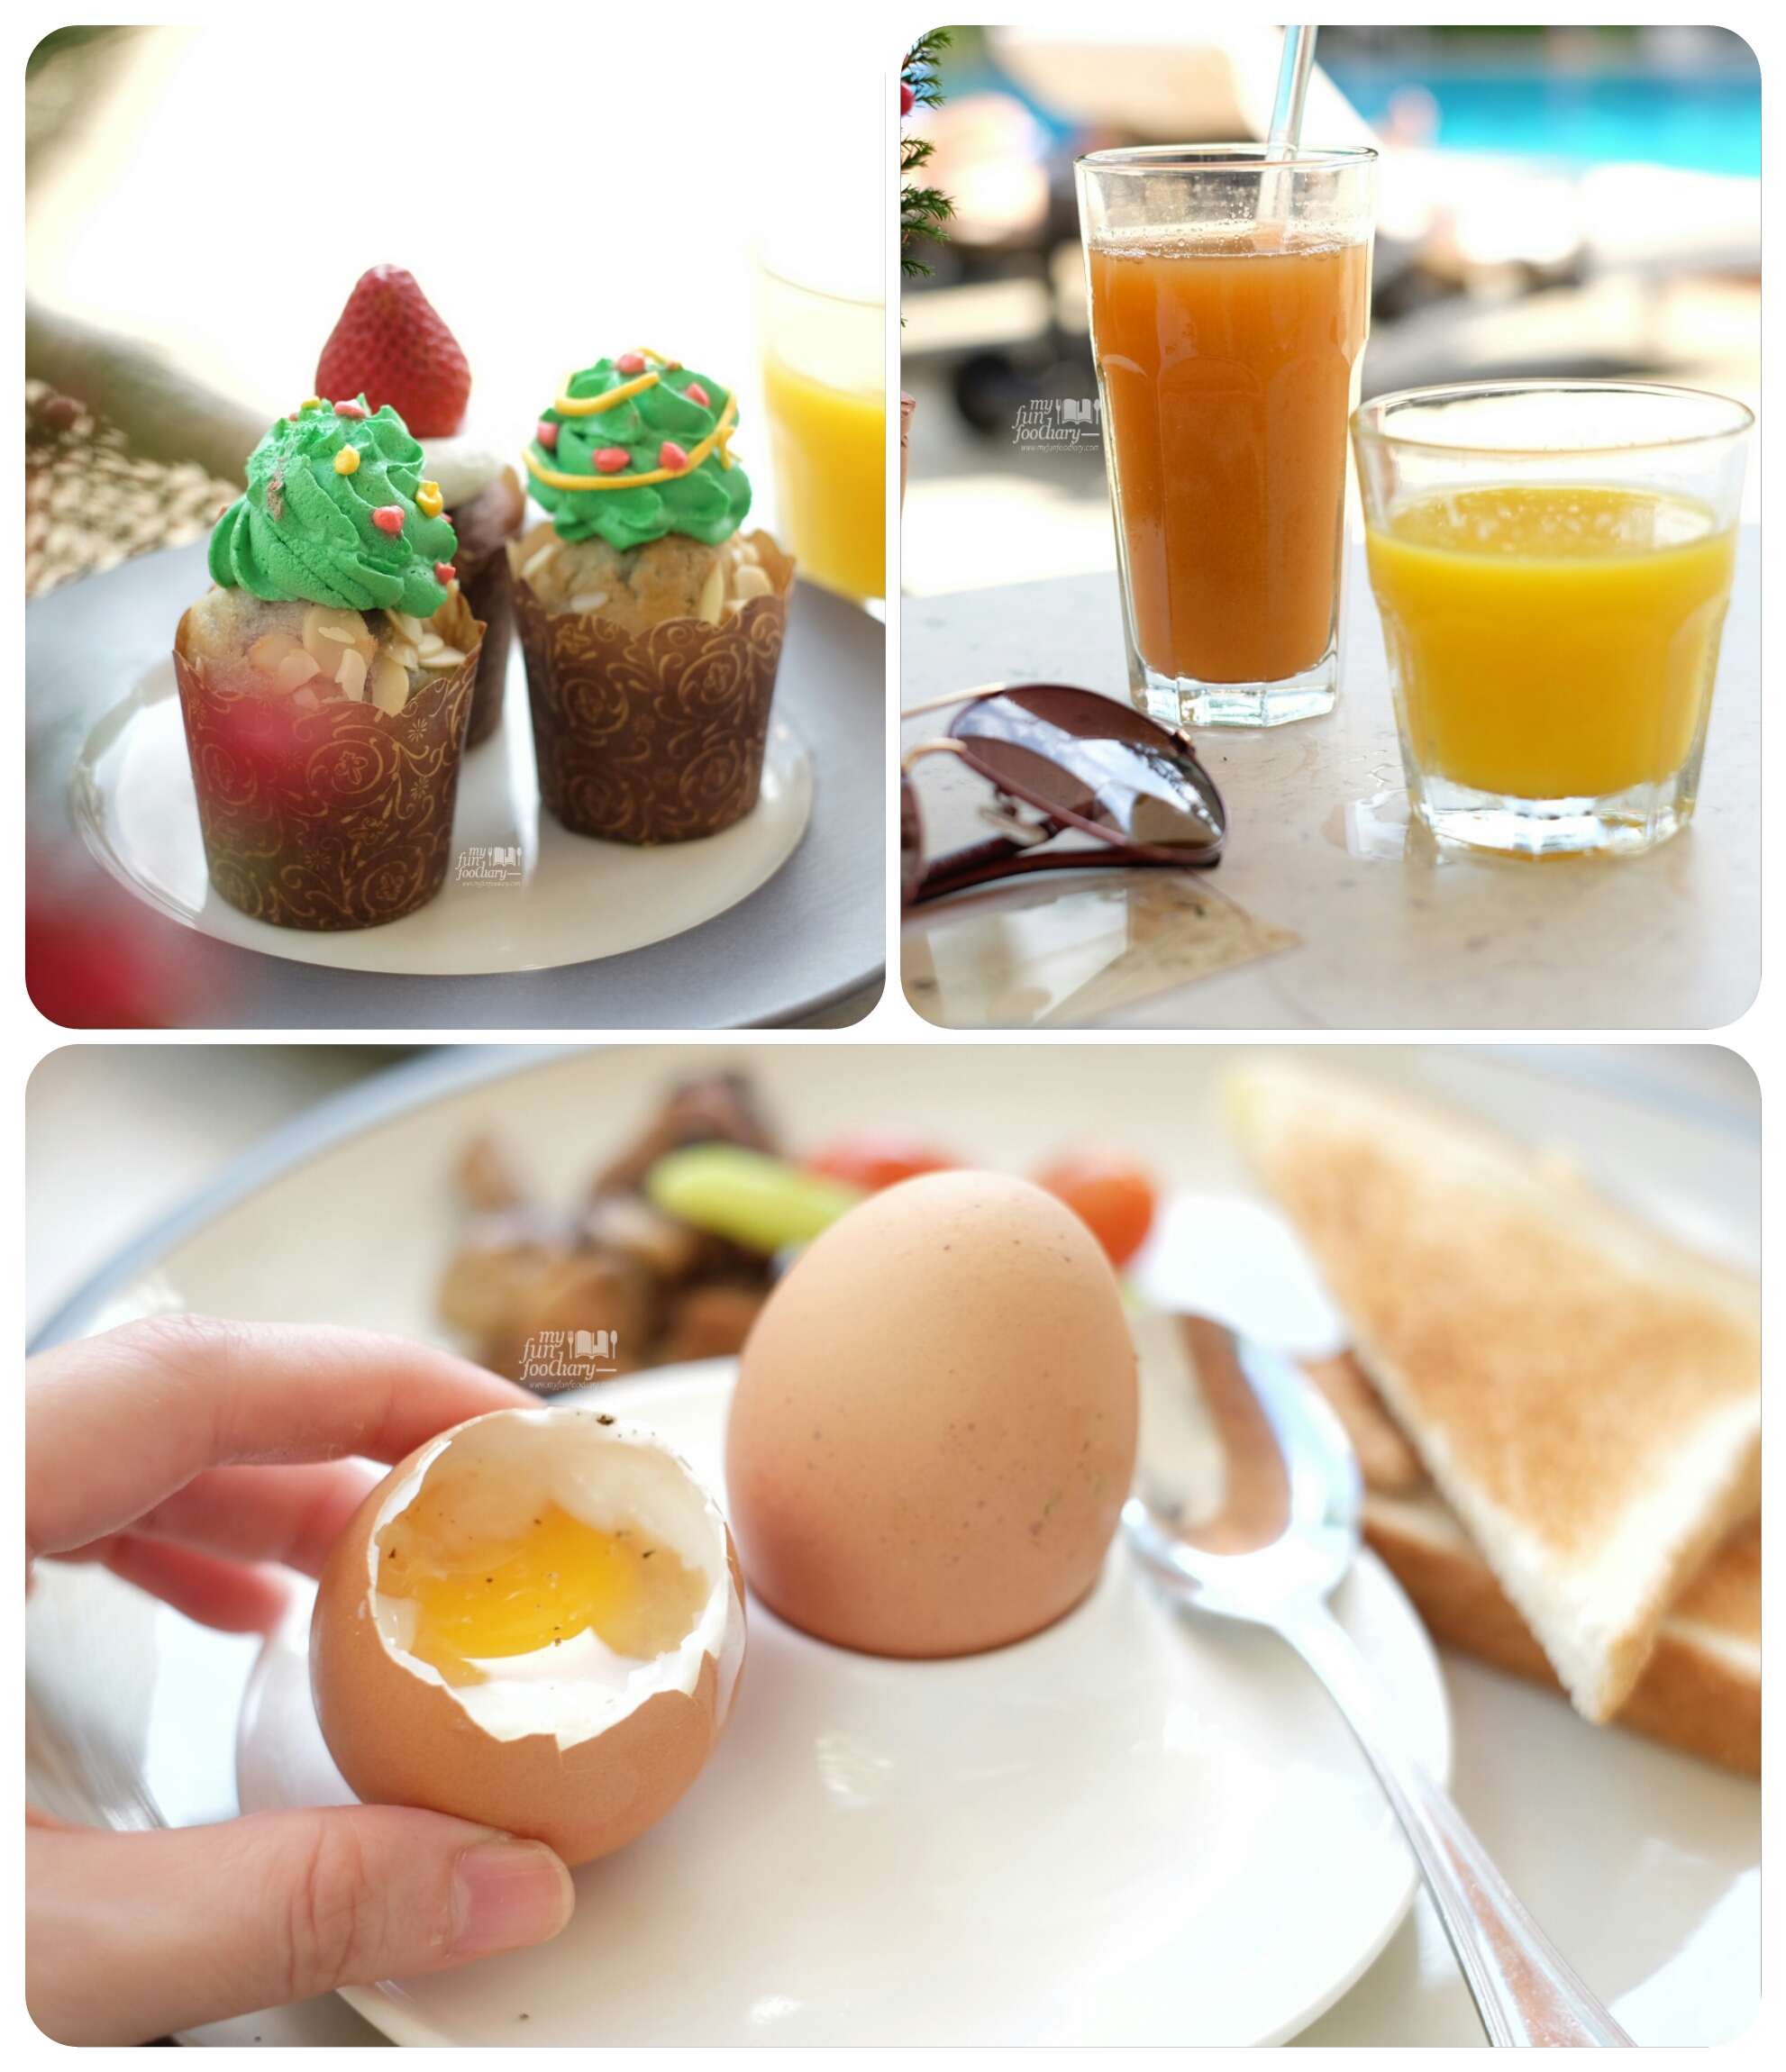 Half Boiled Egg + Cupcakes + Fresh Juices at The Waterfall Shangri-La Singapore by Myfunfoodiary